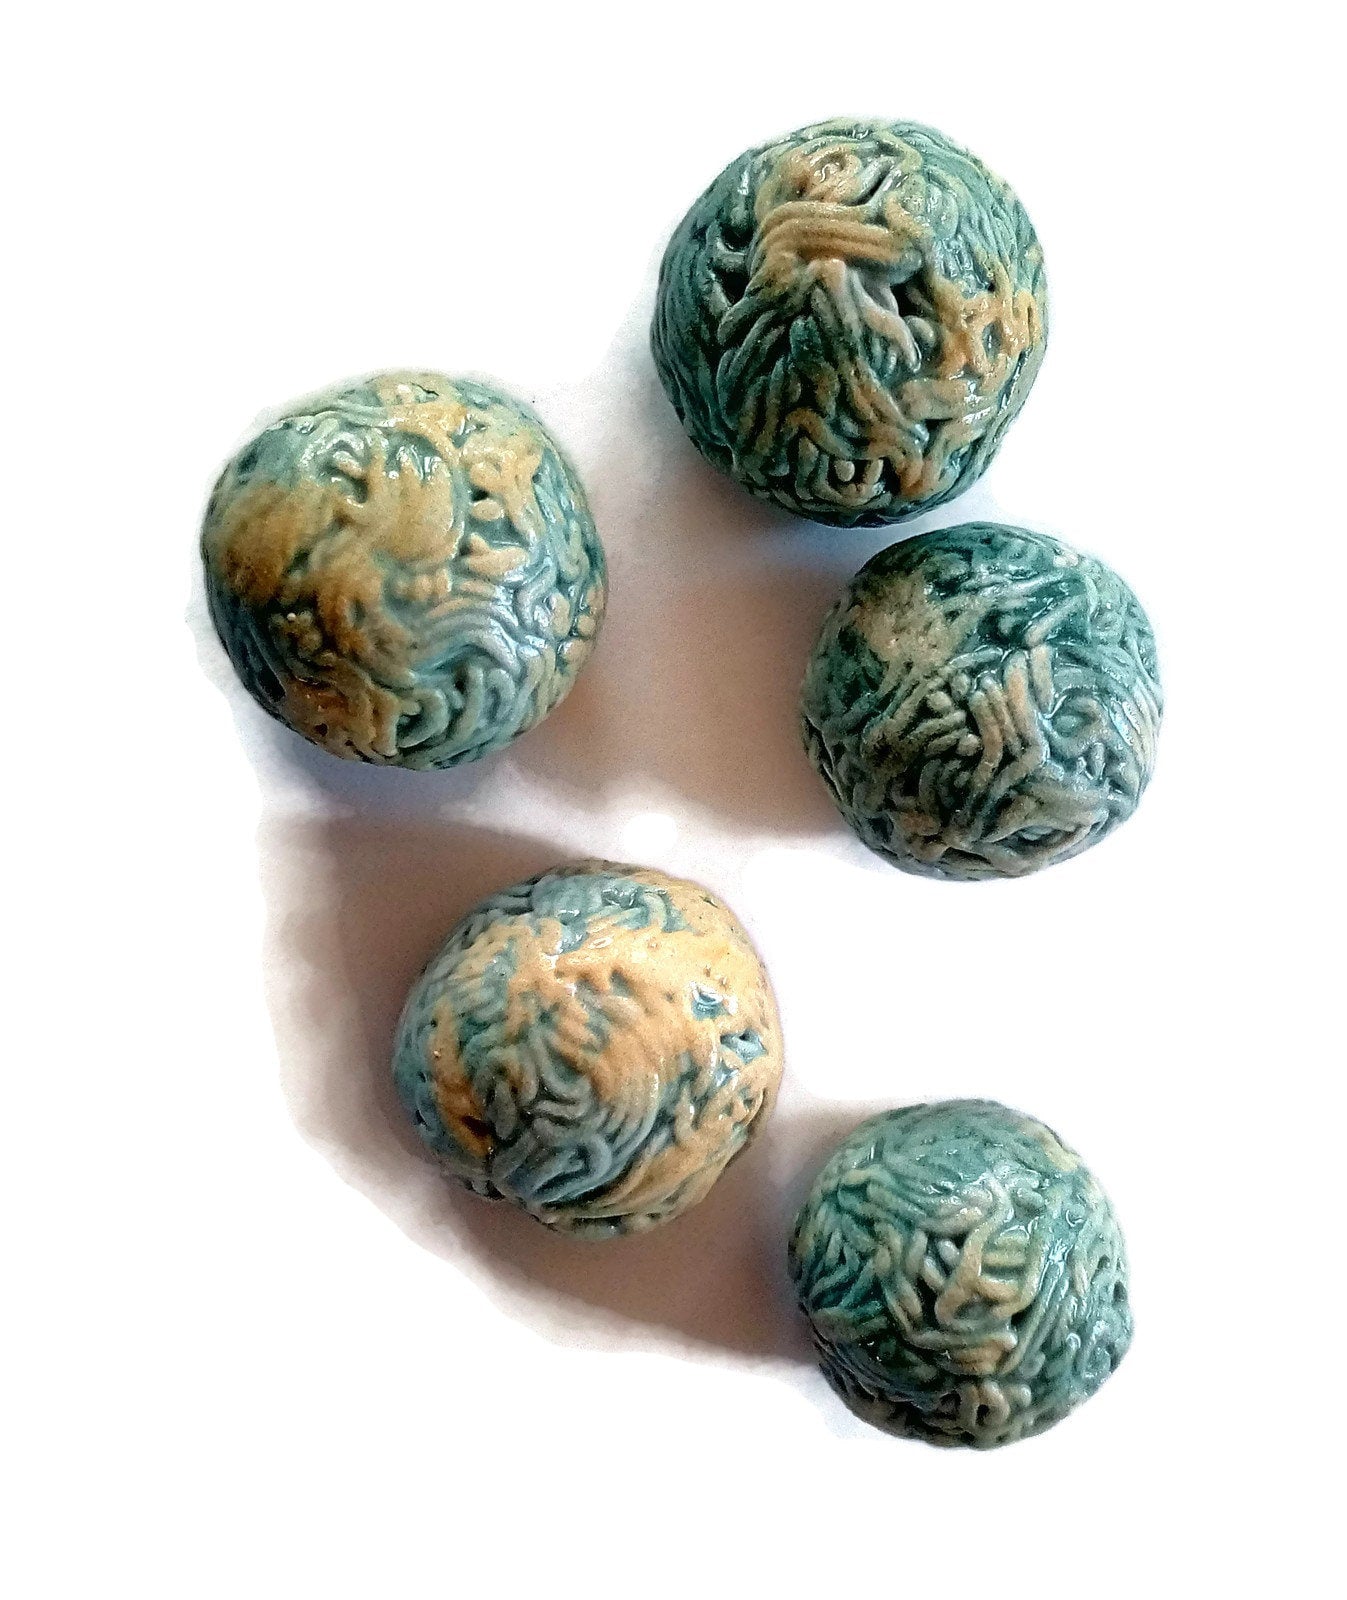 5Pc Green Assorted Round Cabochon Strange And Unusual, Handmade Ceramic Beads No Hole For Jewelry Making, Porcelain - Ceramica Ana Rafael